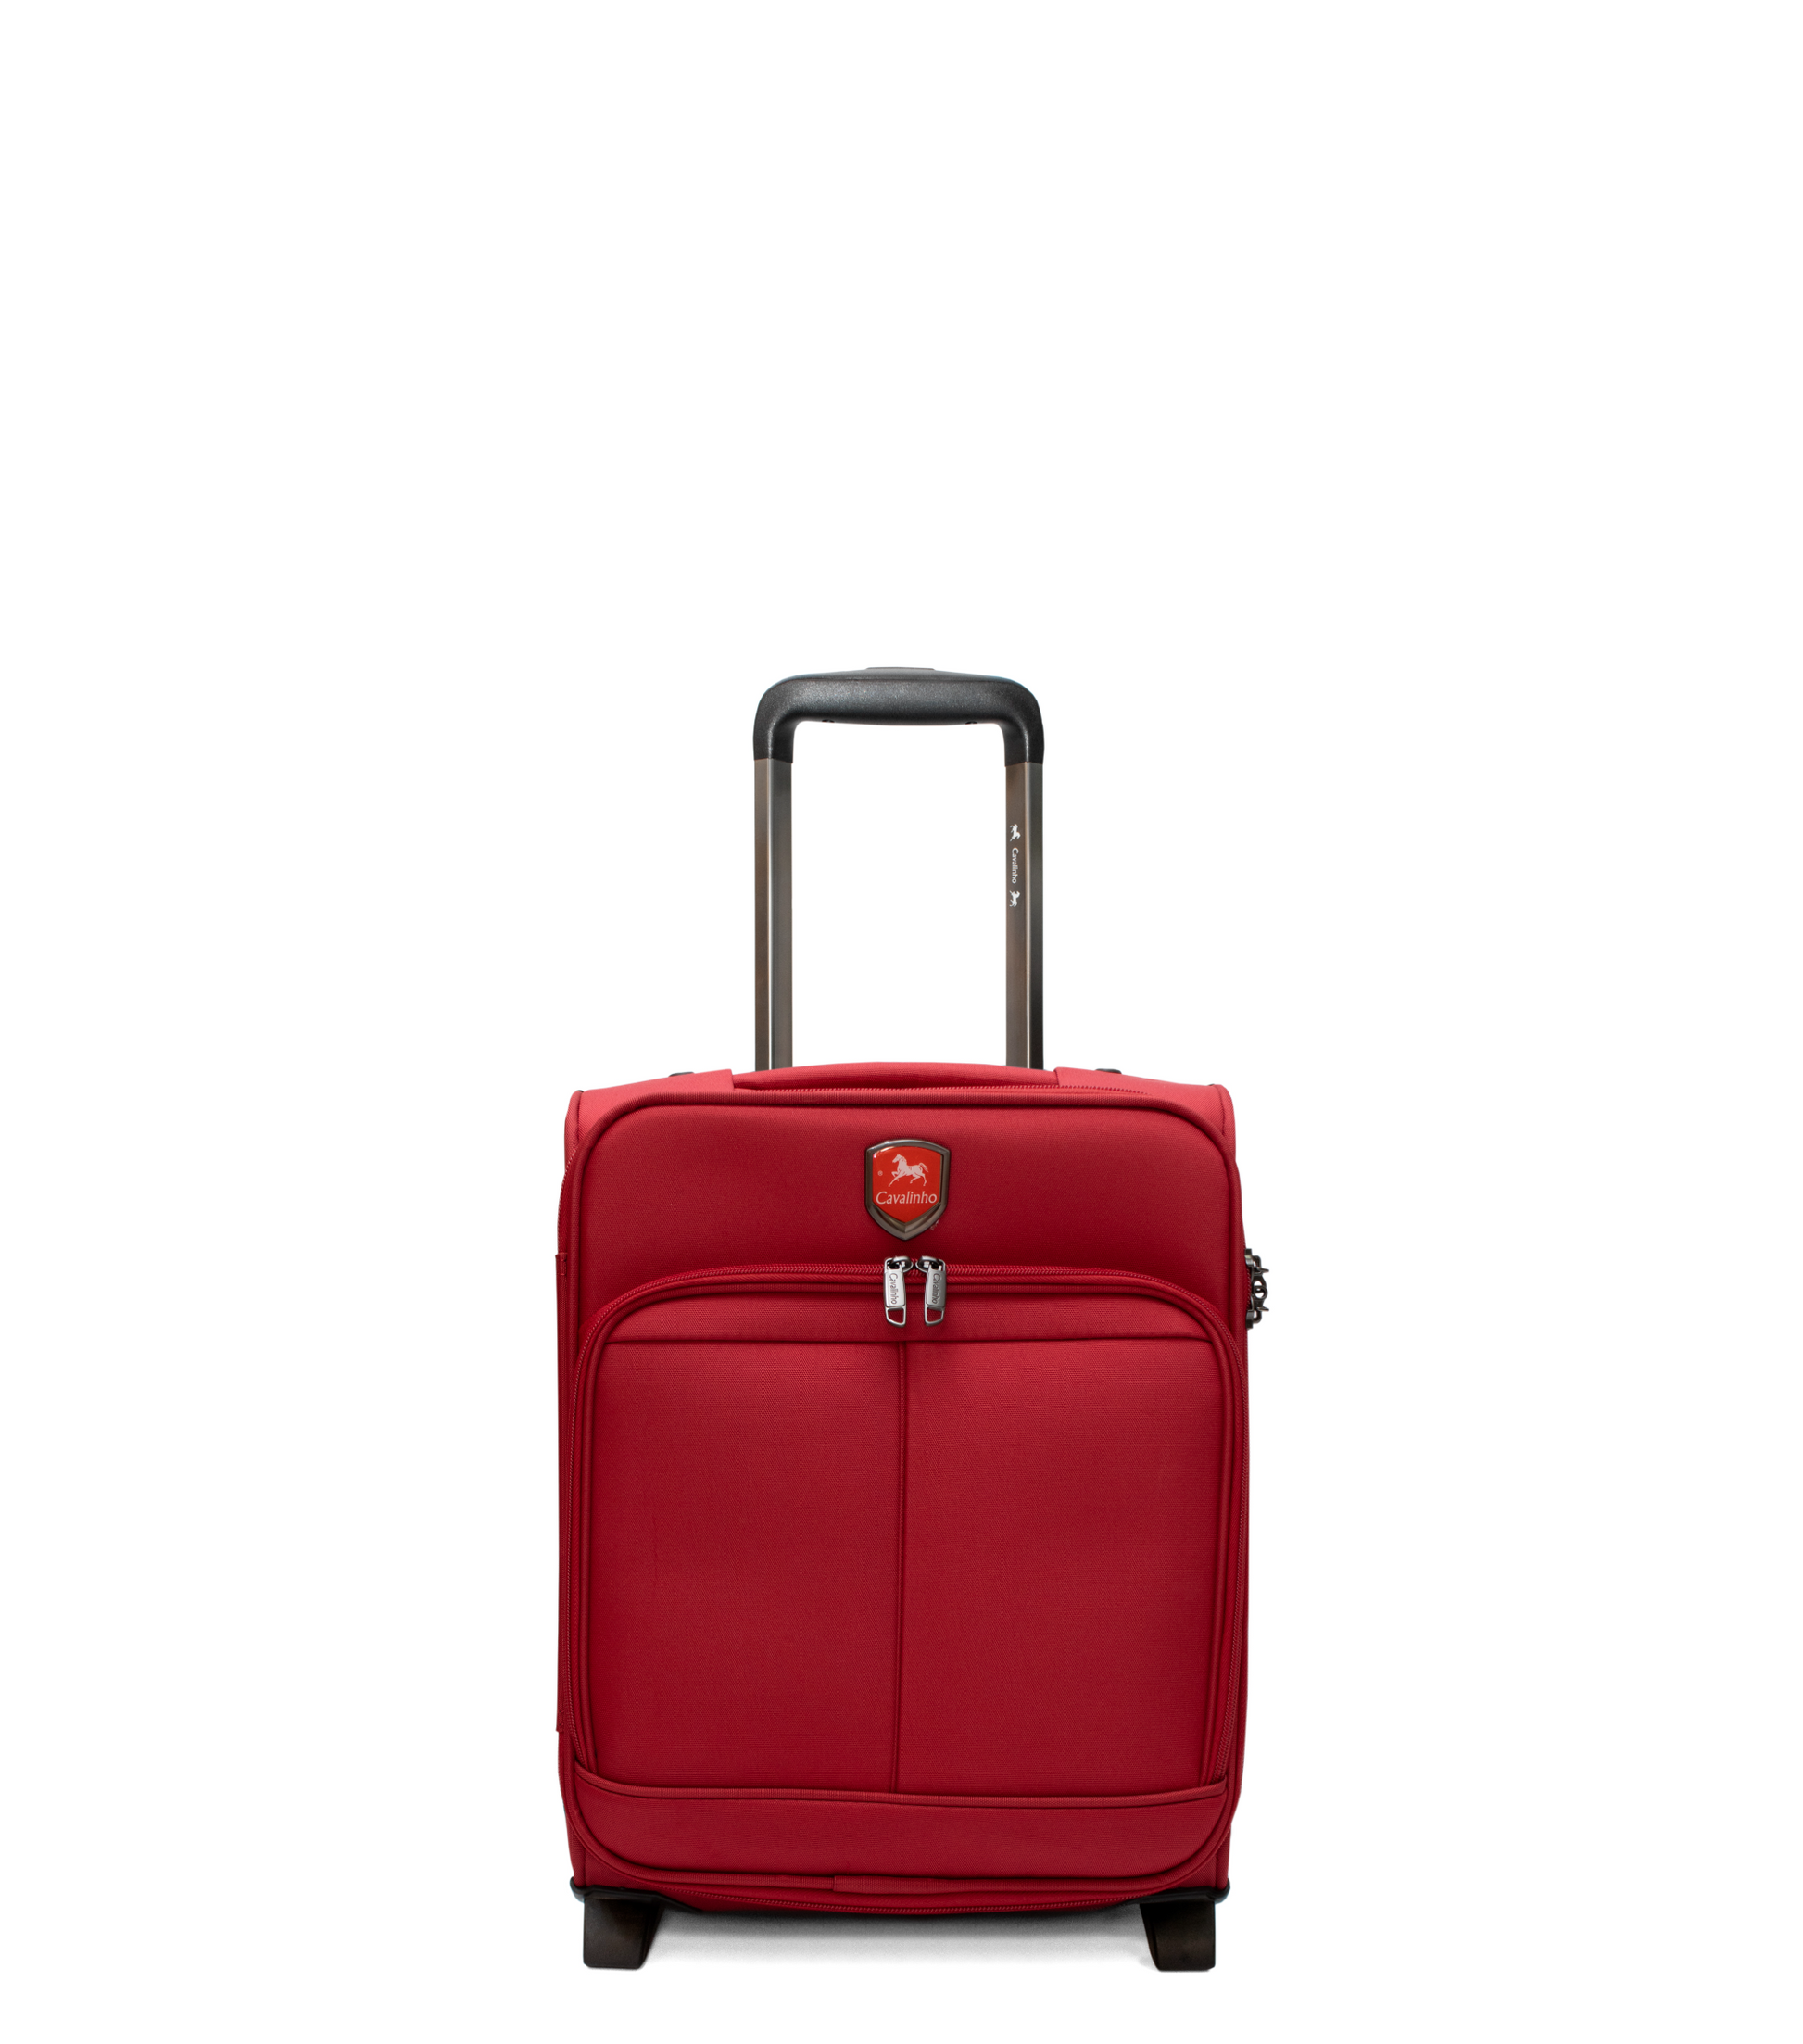 Cavalinho Carry-on Softside Cabin Luggage (16" or 19") - 16 inch Red - 68020003.04.16_1